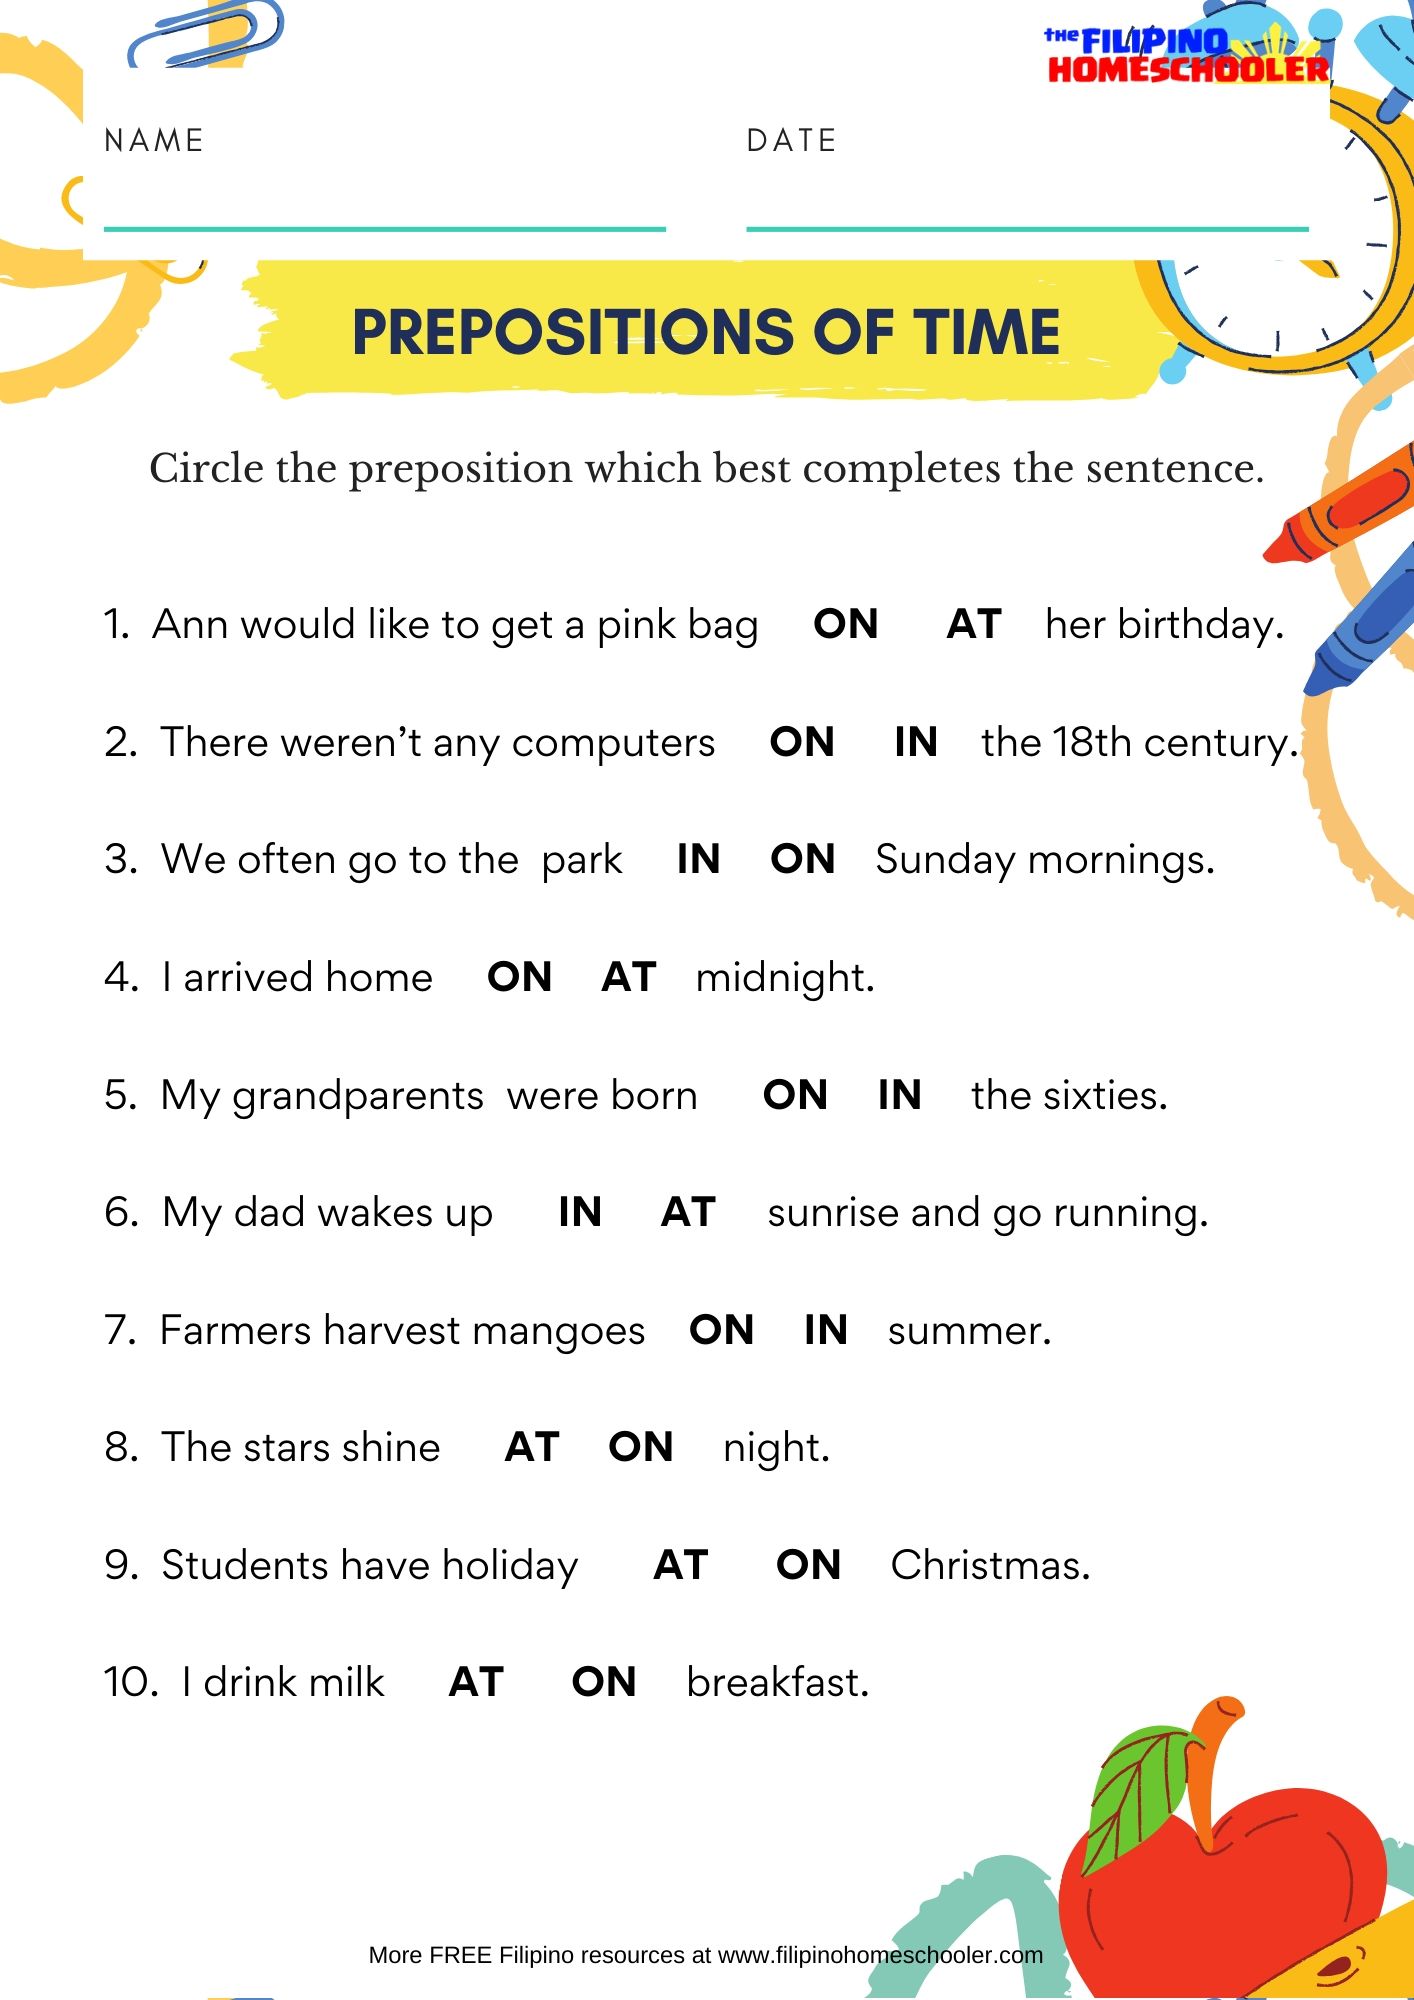 IN, ON, AT: Prepositions of Time Worksheet — The Filipino Homeschooler